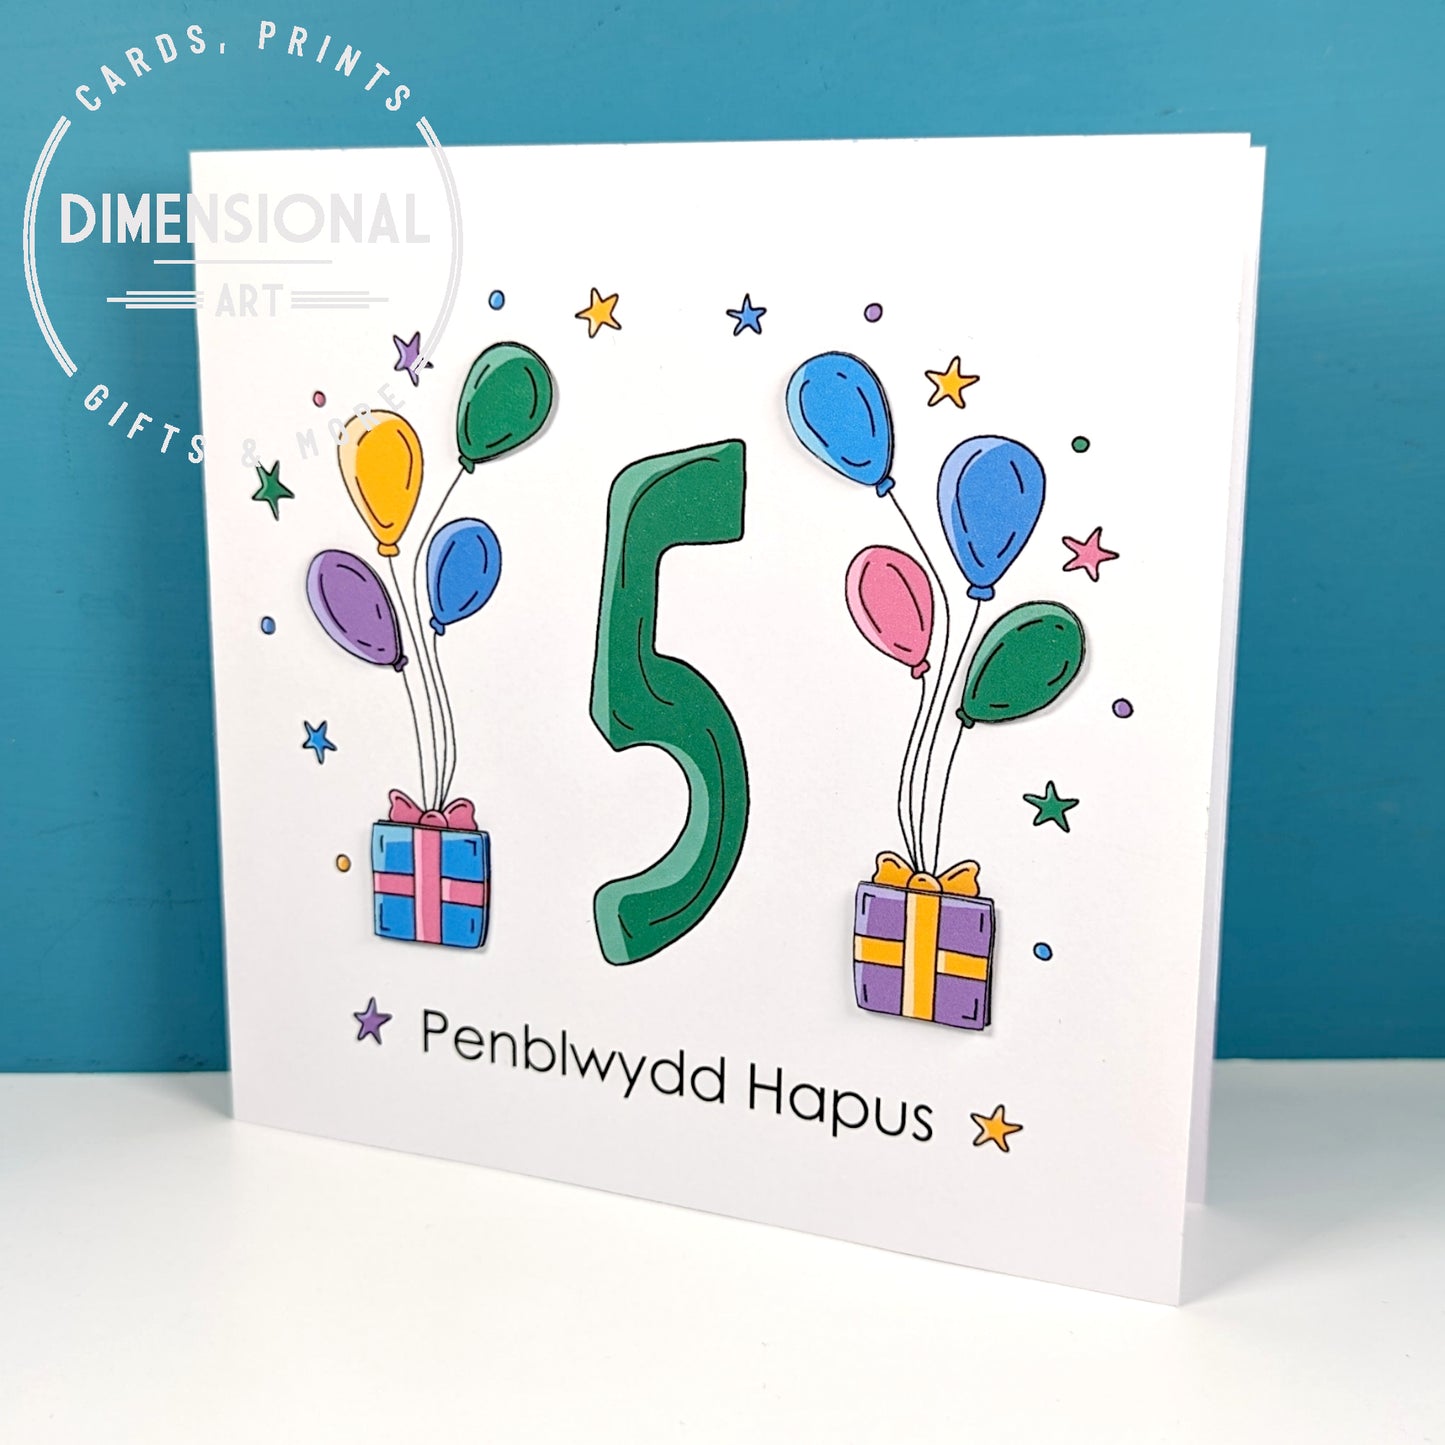 5th balloons and presents Penblwydd Hapus (Birthday) Card - Welsh